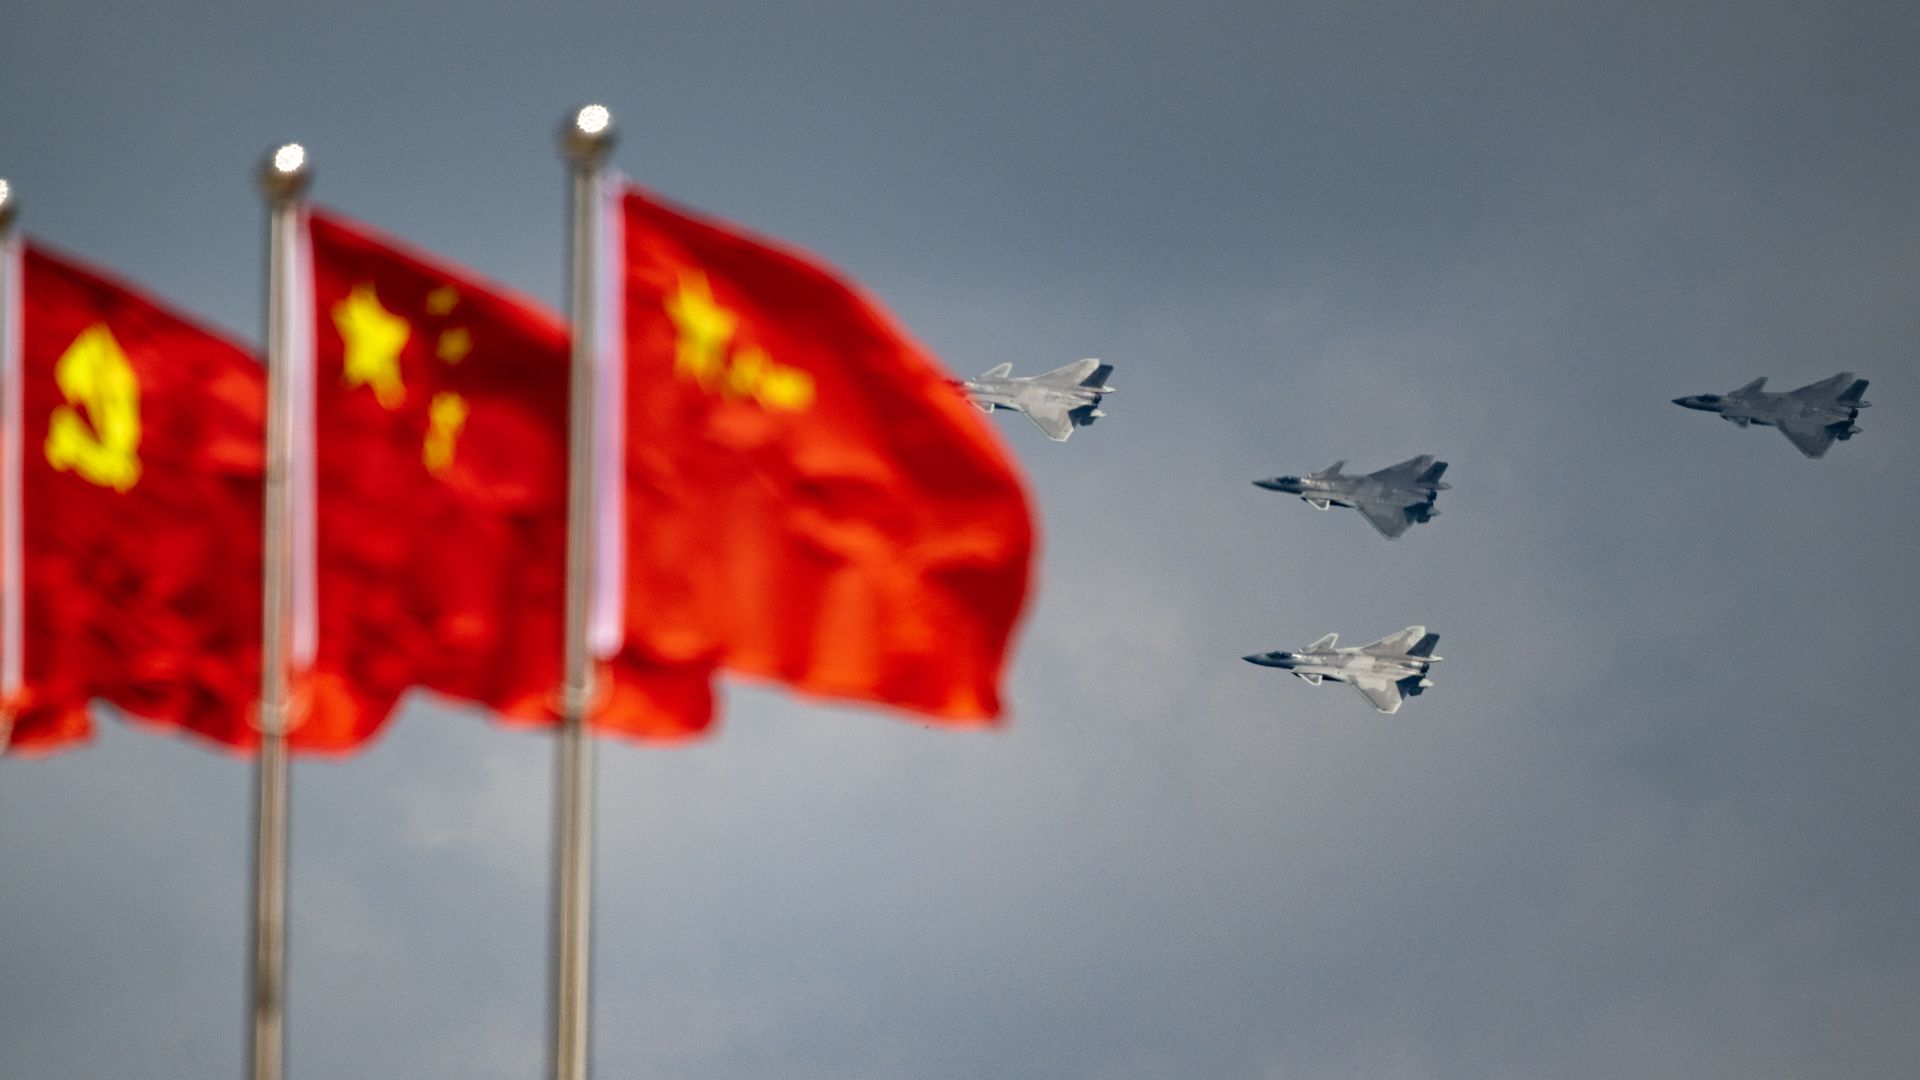 J-20 stealth fighter jets rehearse for the upcoming 2023 Changchun Air Show on July 24, 2023 in Changchun, Jilin Province of China.